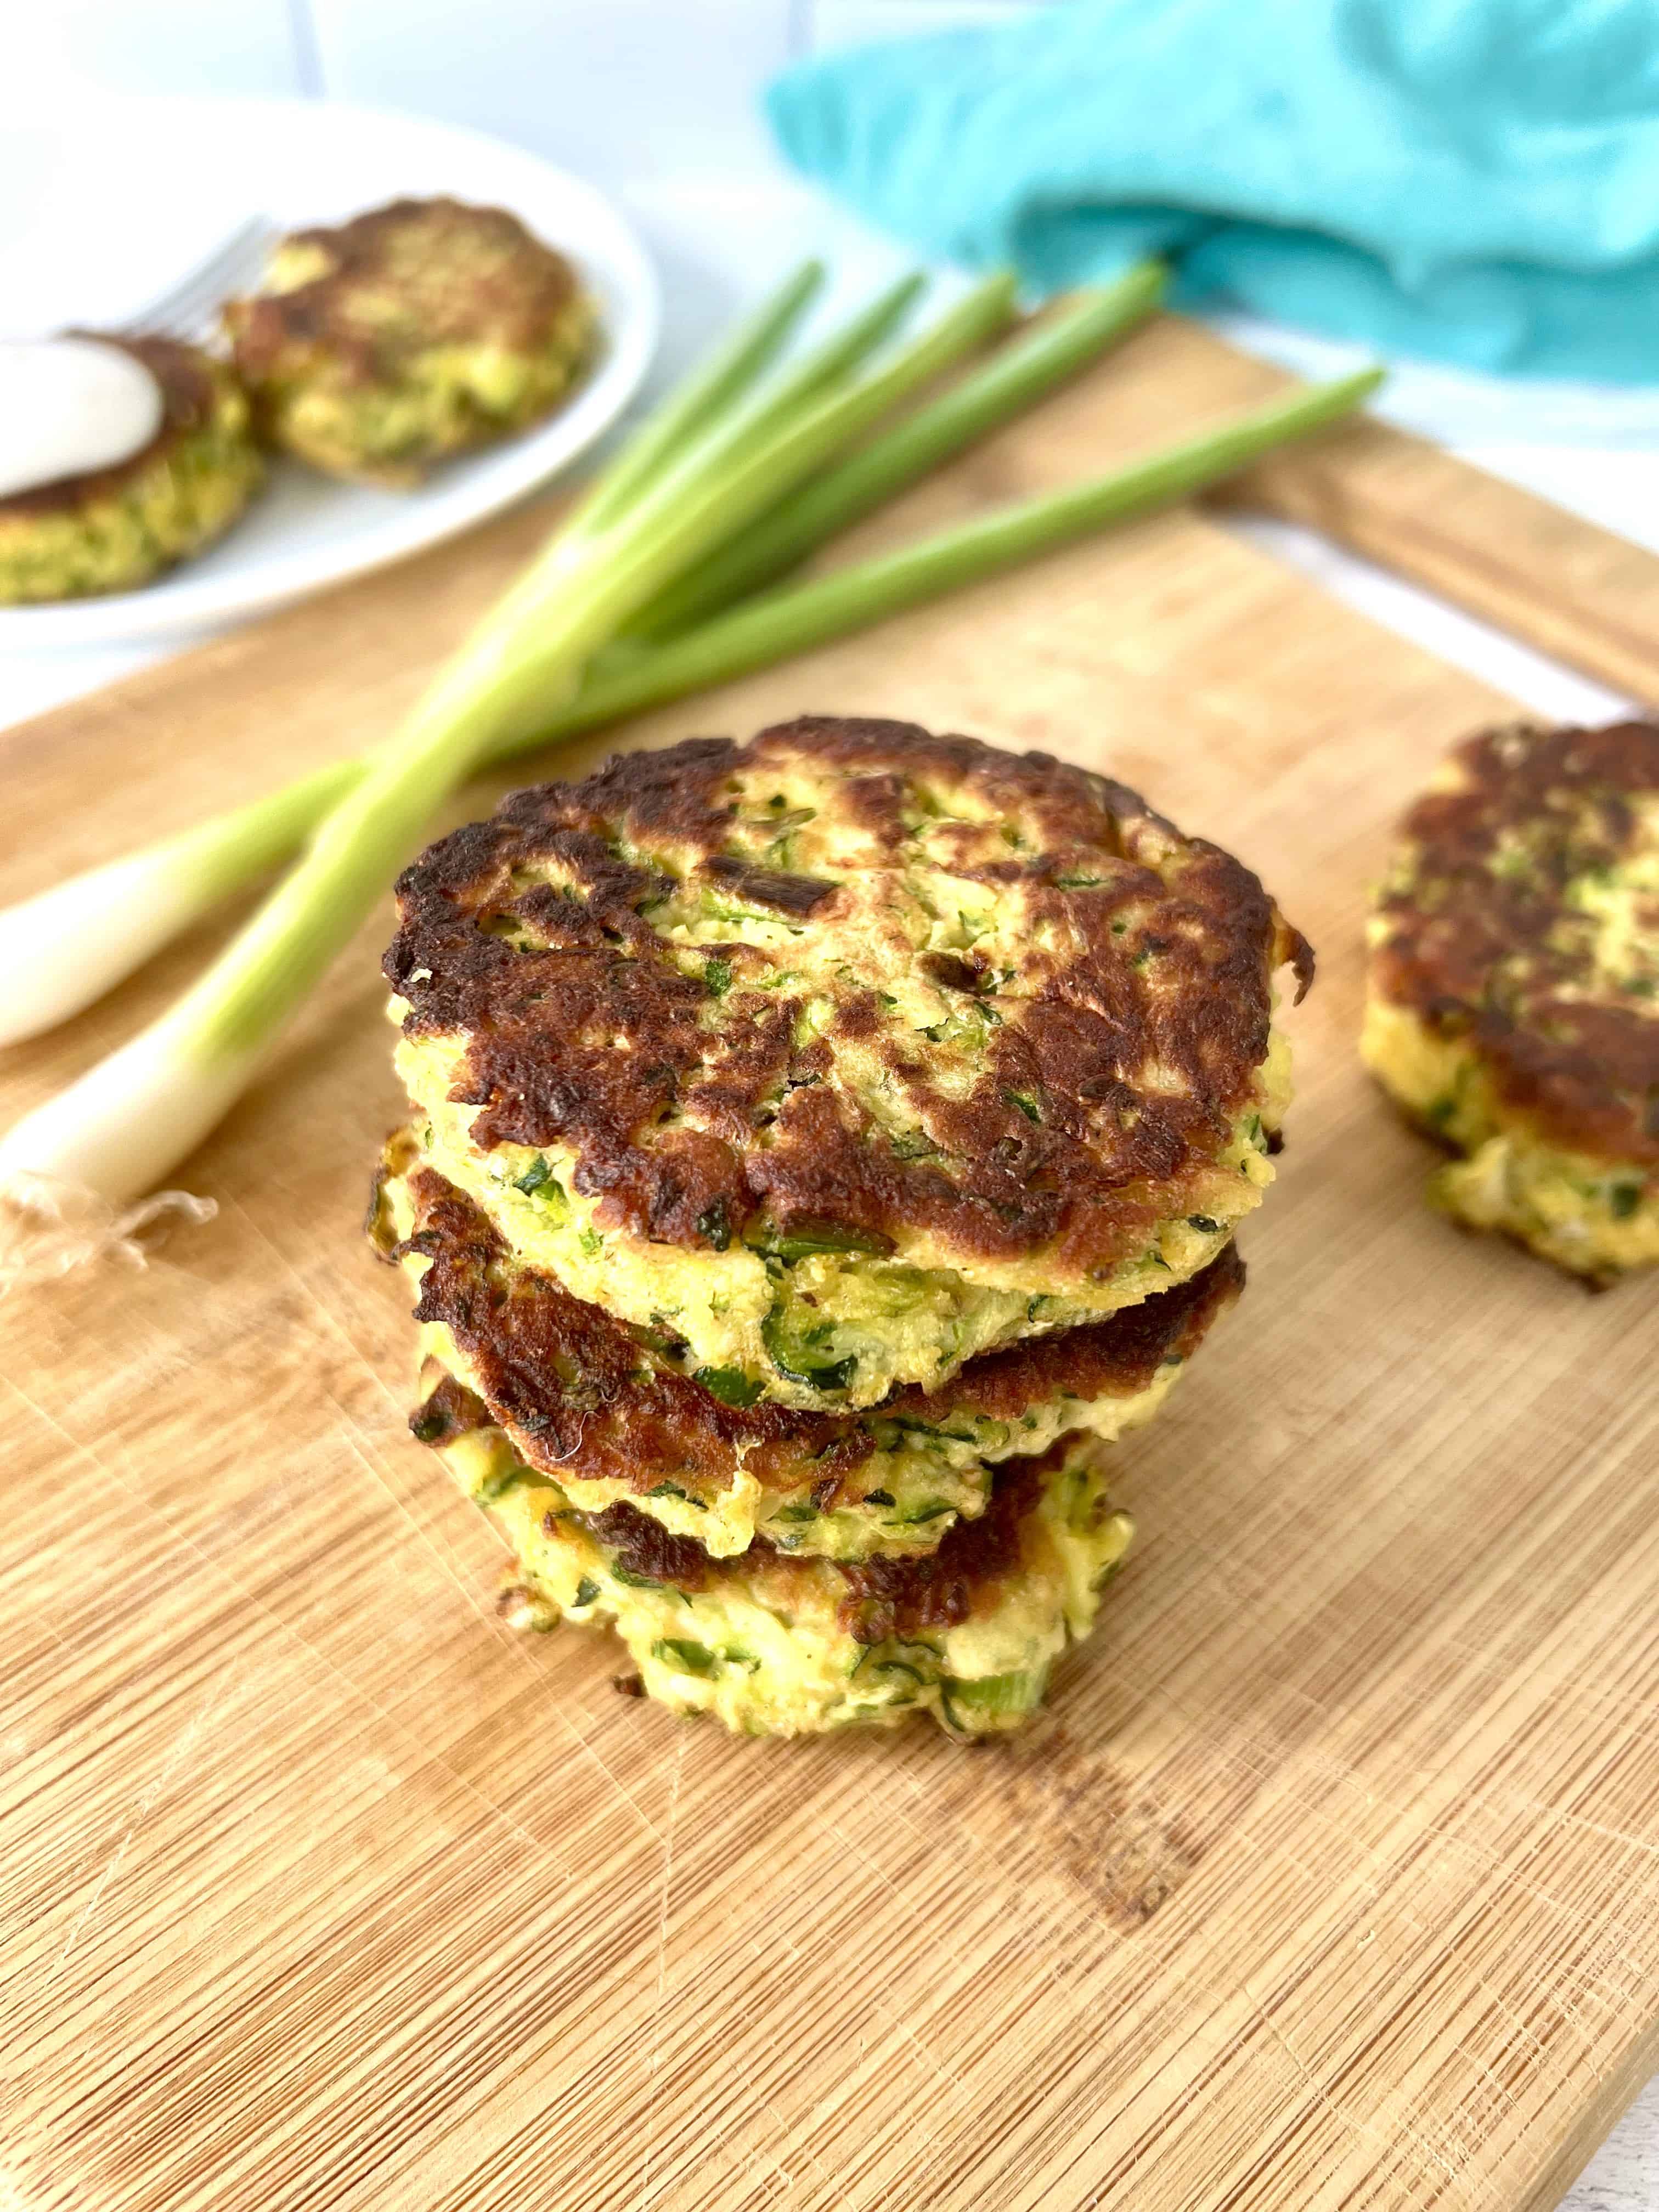 coconut flour zucchini fritters stacked on a wooden cutting board next to scallions and another fritter